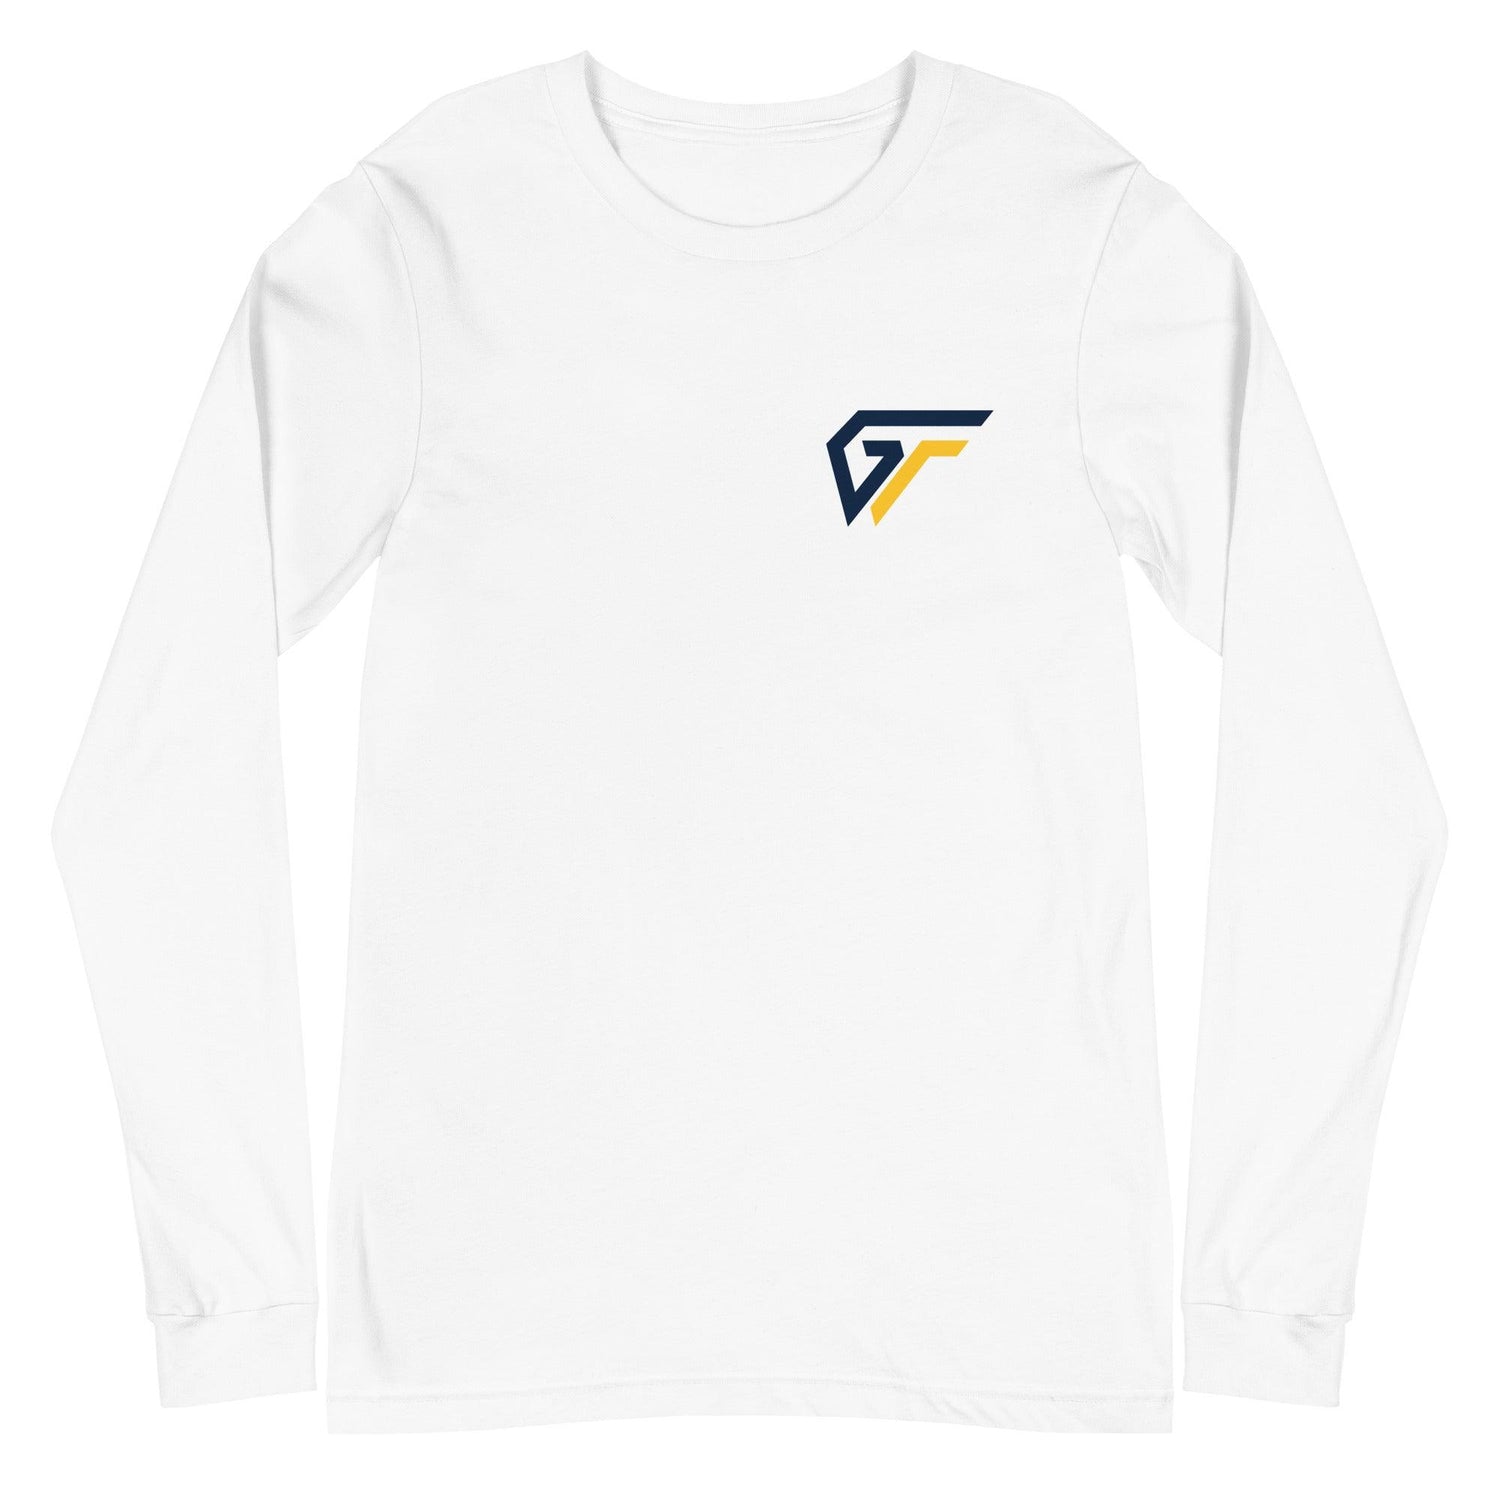 Gary Forbes "Essential" Long Sleeve Tee - Fan Arch